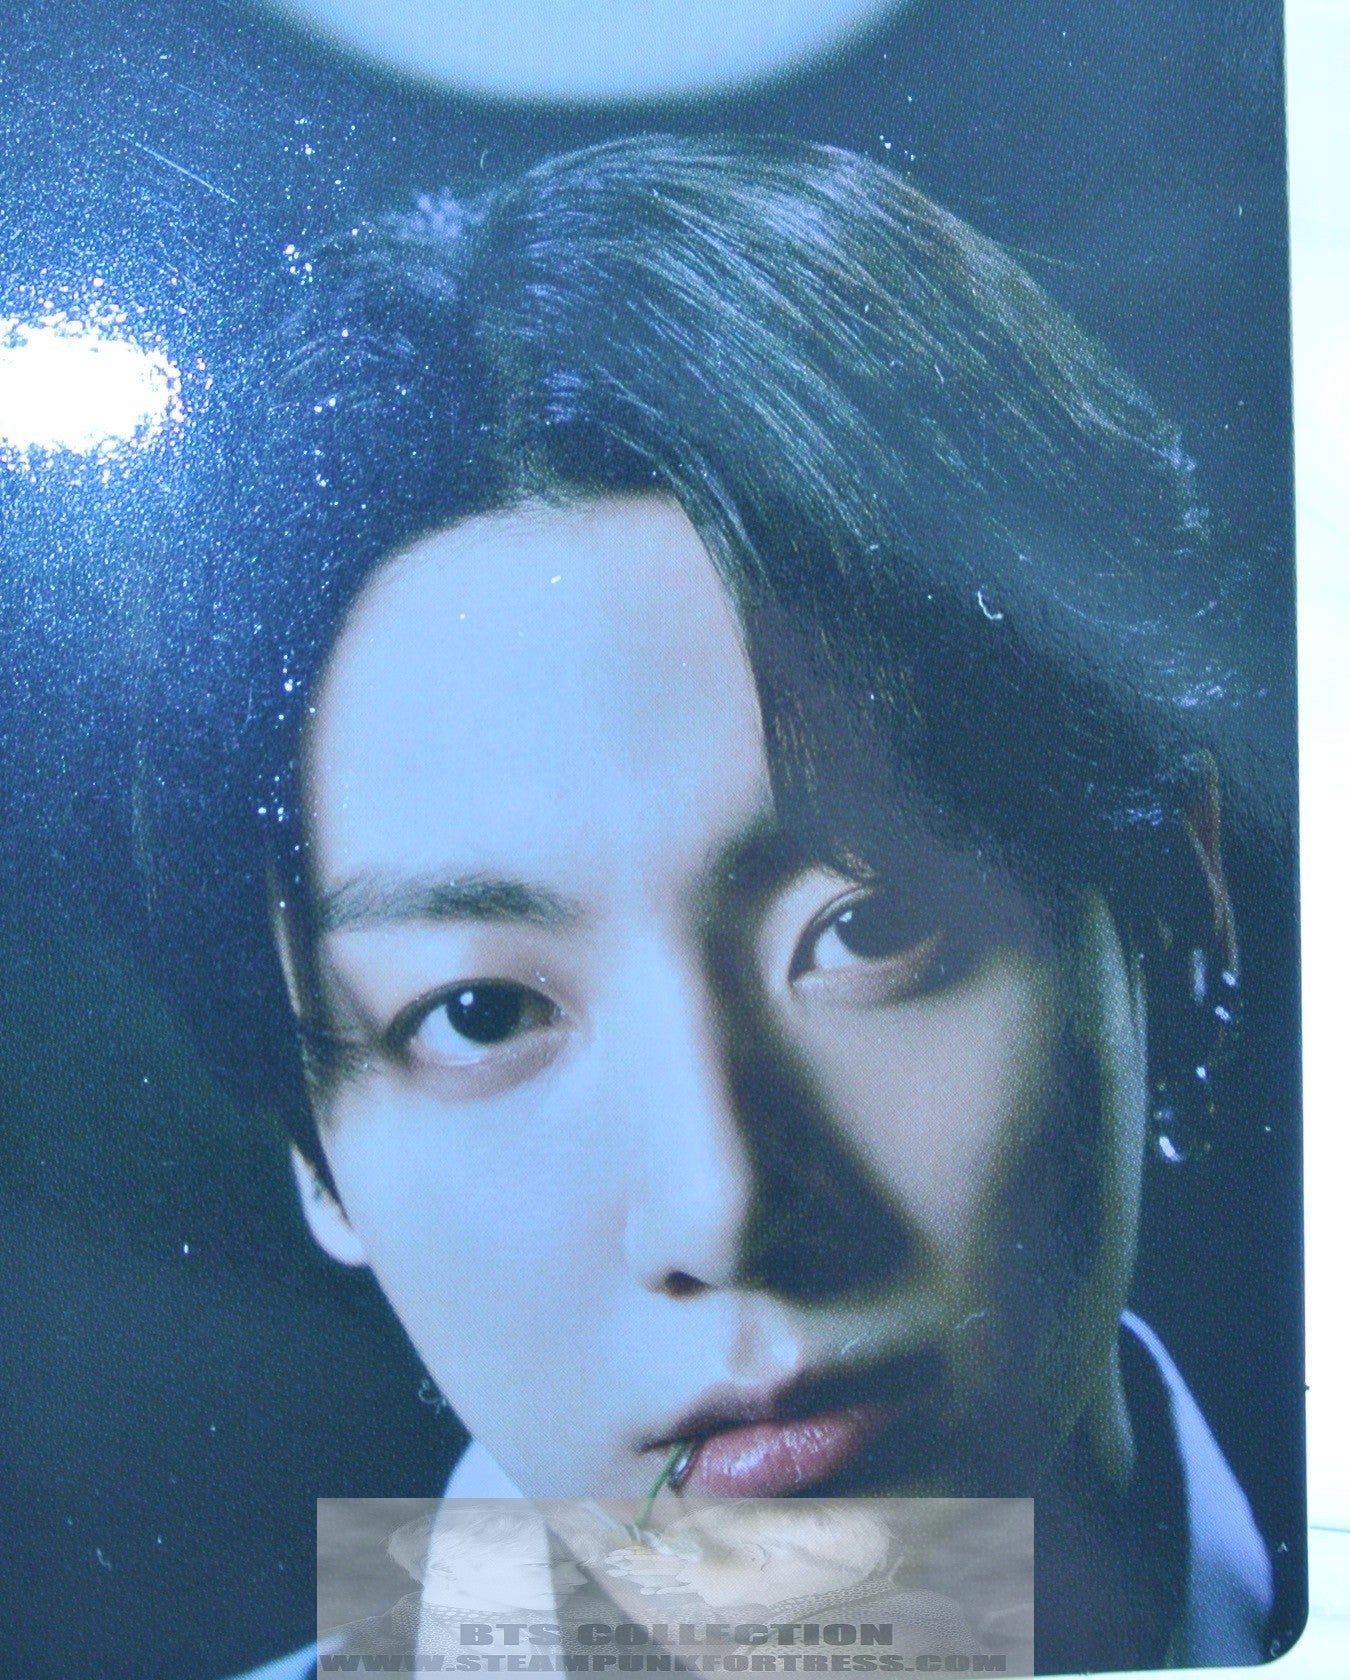 BTS JUNGKOOK JEON DALMAJUNG #6 PHOTOCARD FLAKES PHOTO CARD PC 2022 NEW OFFICIAL MERCHANDISE